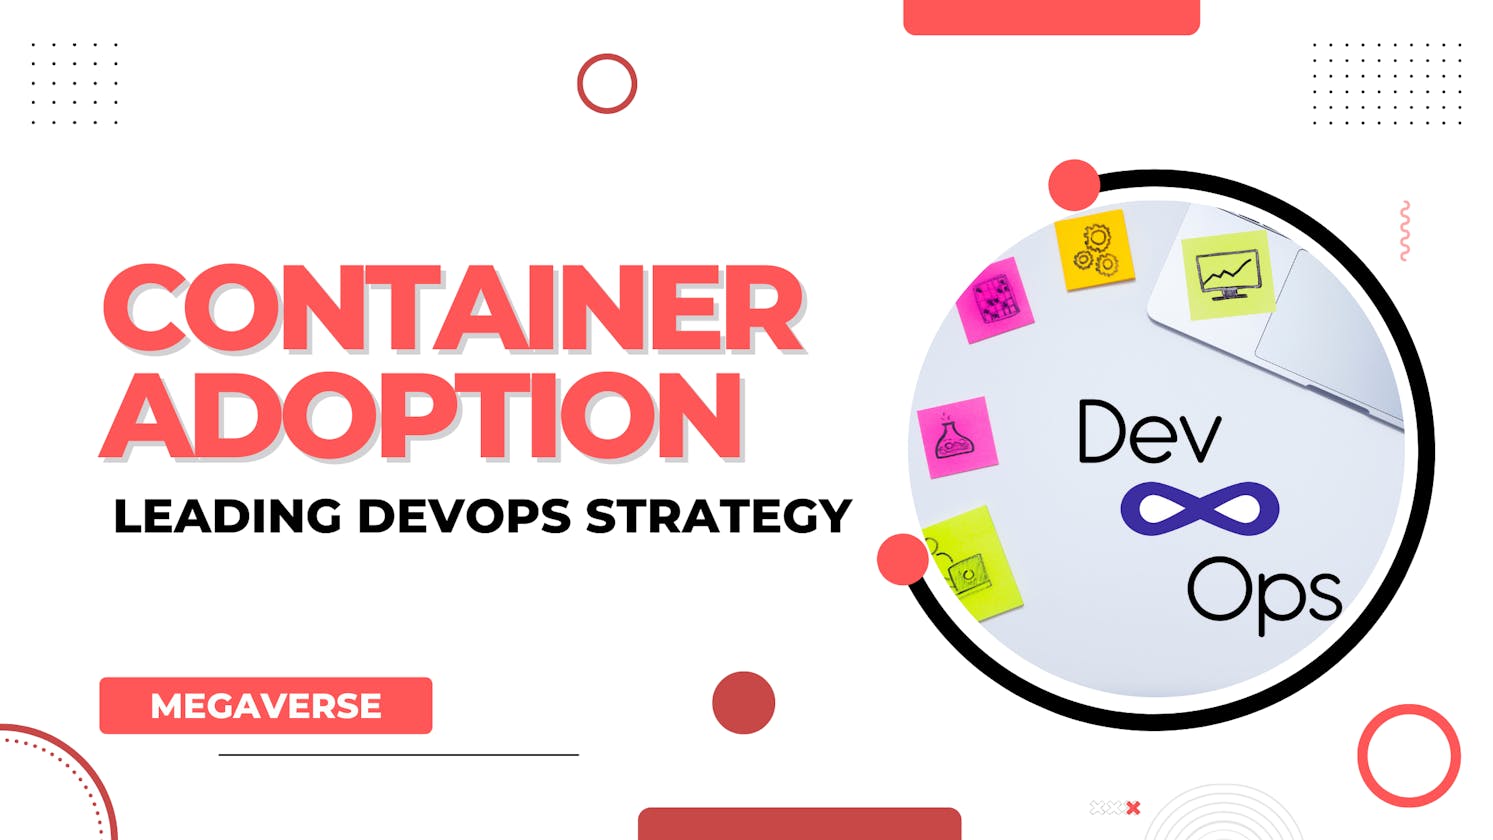 Container Adoption Leading DevOps Strategy